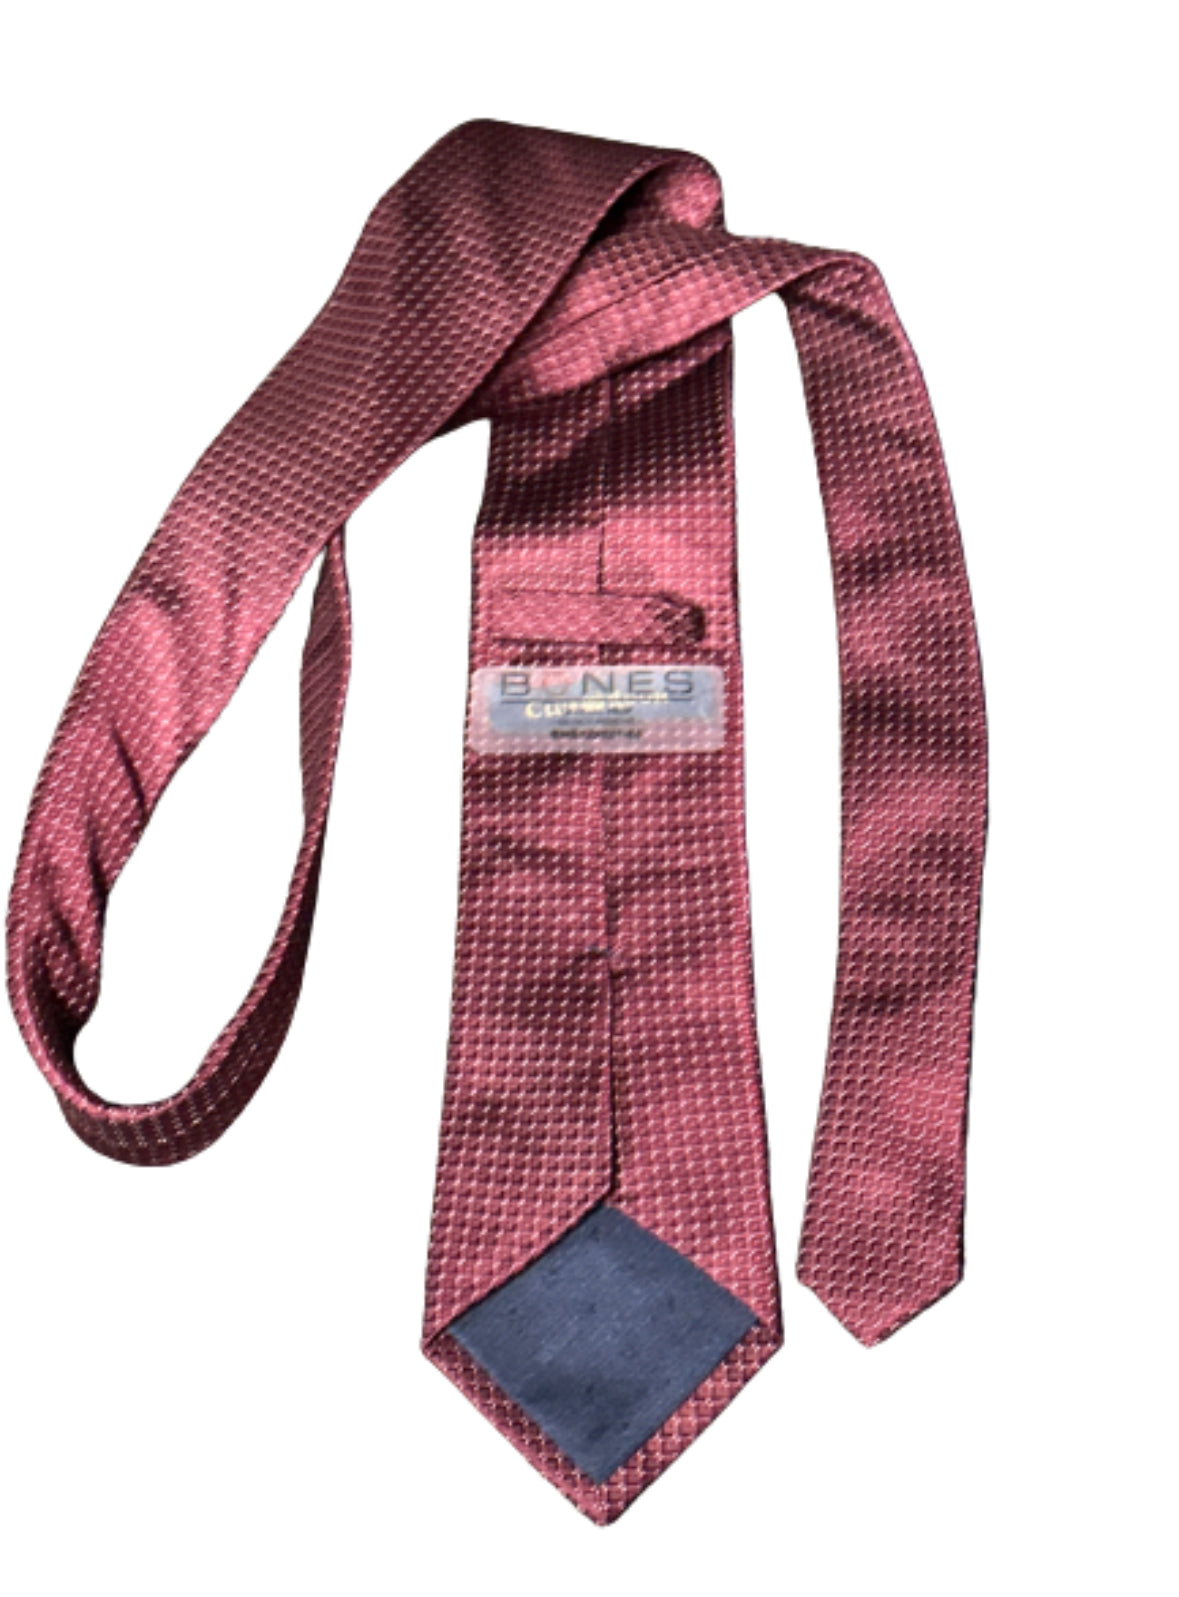 BONES: Agent Booth's episode used Red and White Small Polkadot Necktie & Business Card